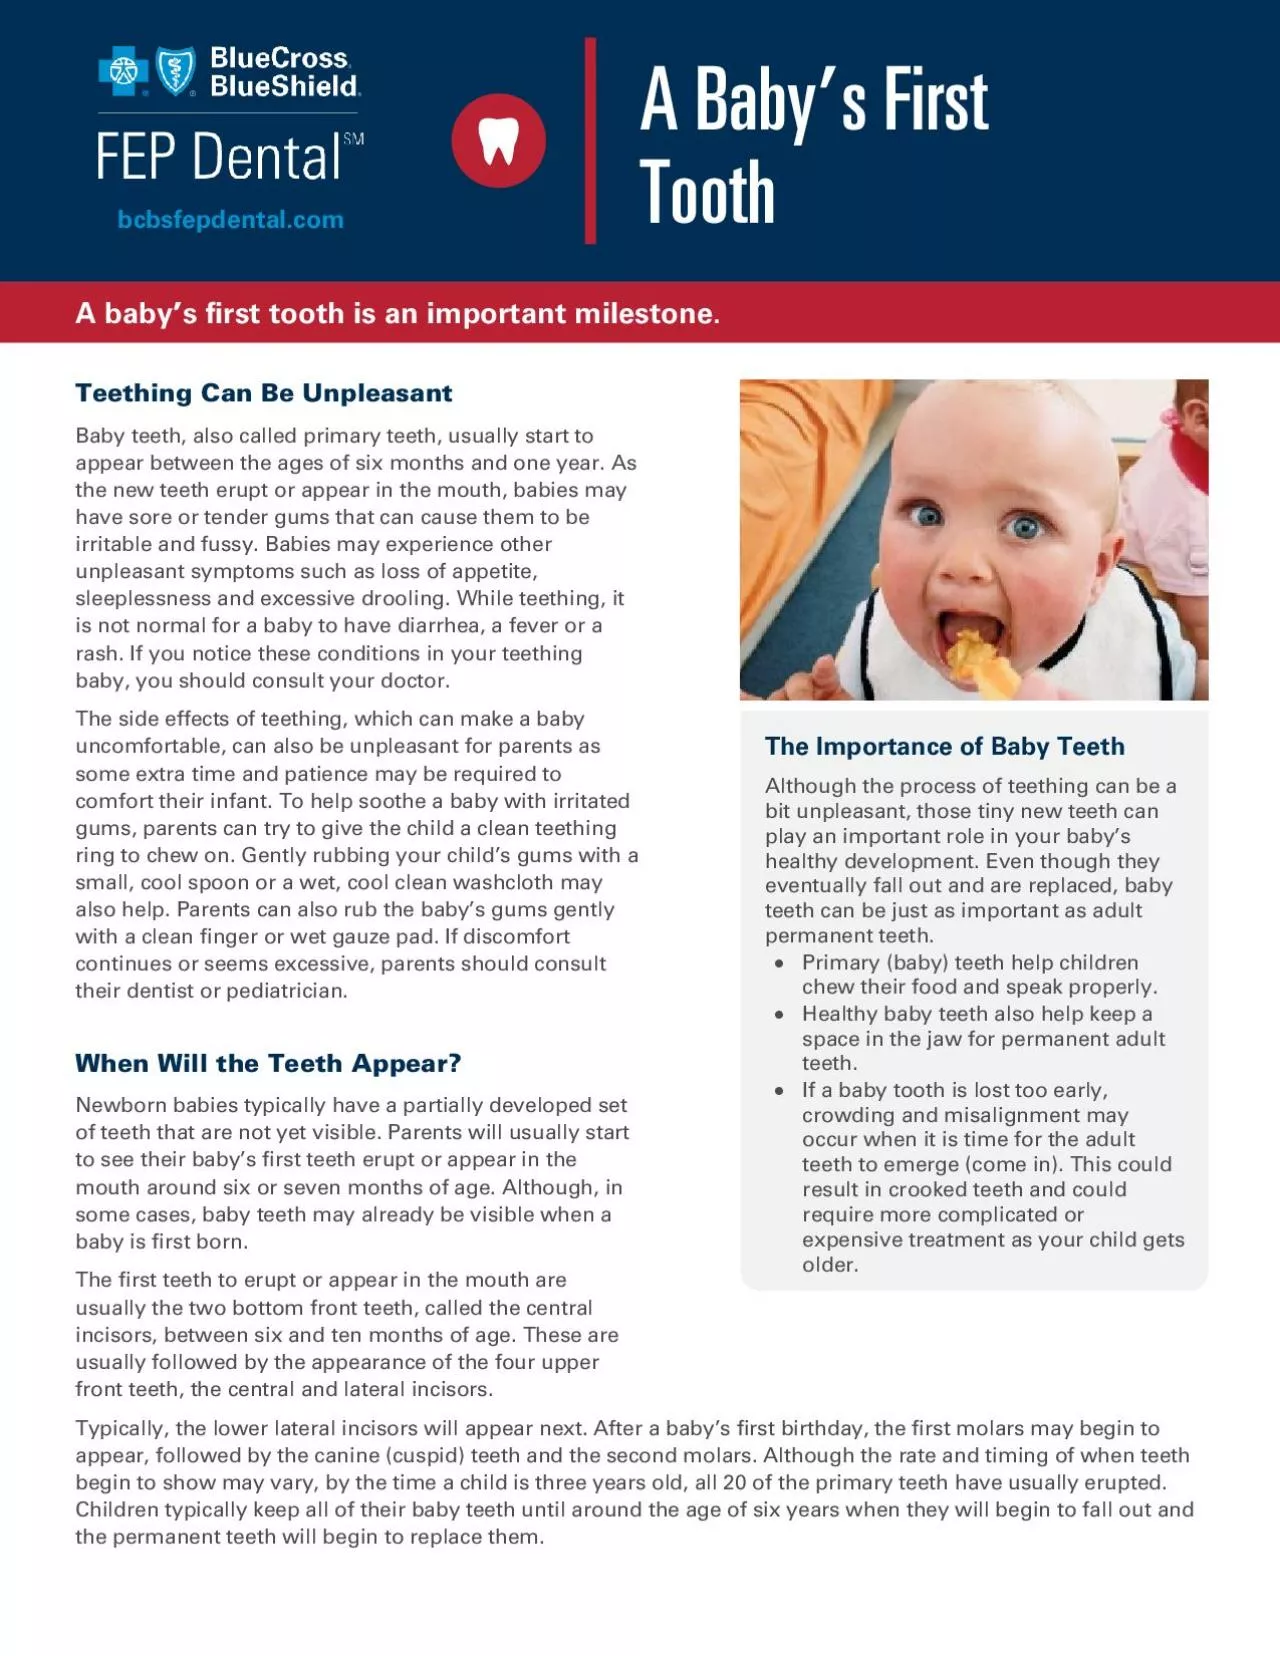 Teething Can Be UnpleasantBaby teeth also called primary teeth usual